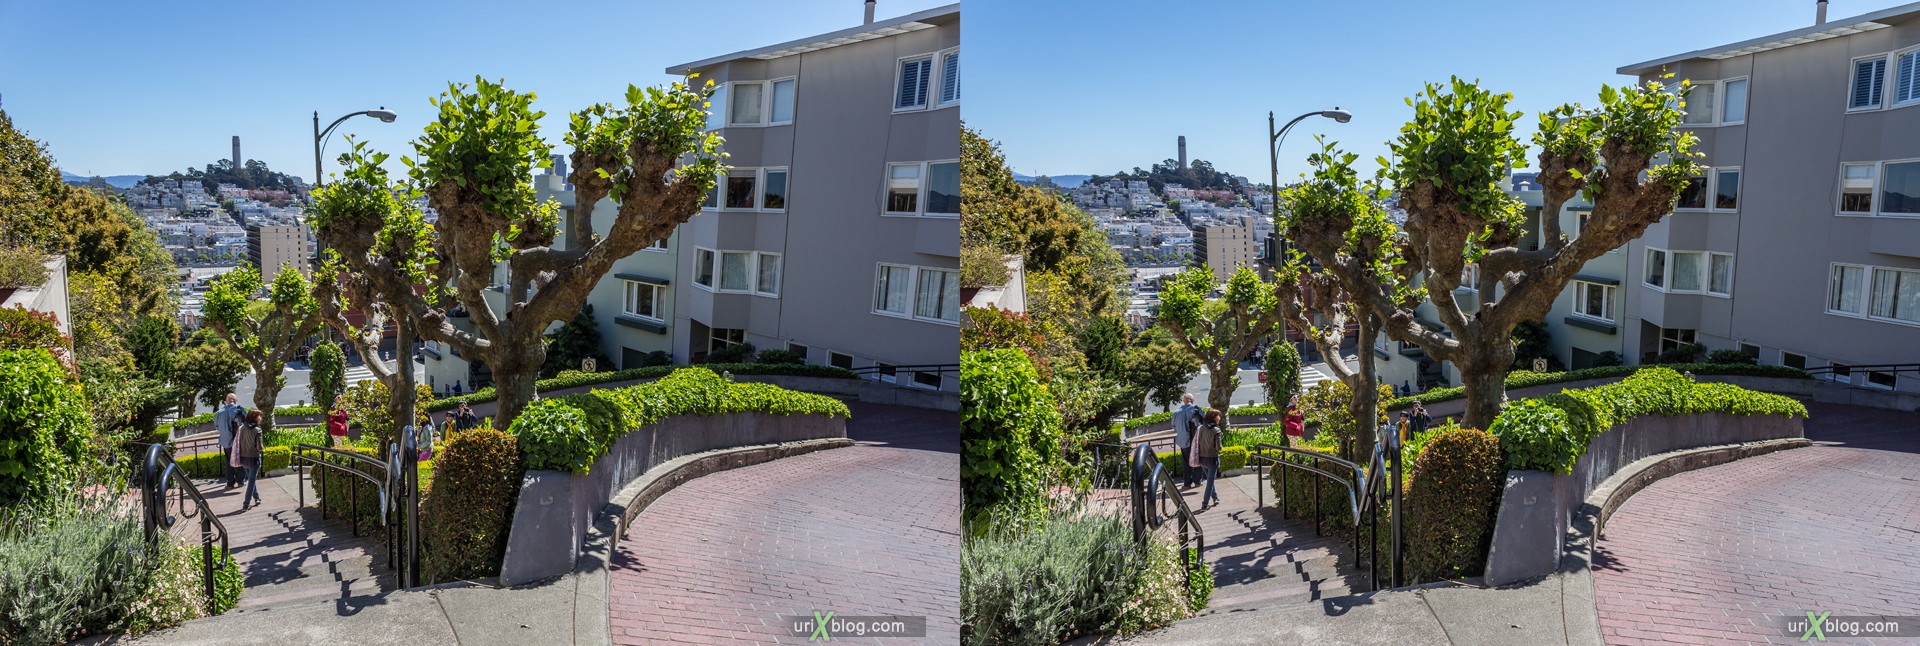 2013, USA, California, San Francisco, Russian hill, Lombard street, 3D, stereo pair, cross-eyed, crossview, cross view stereo pair, stereoscopic